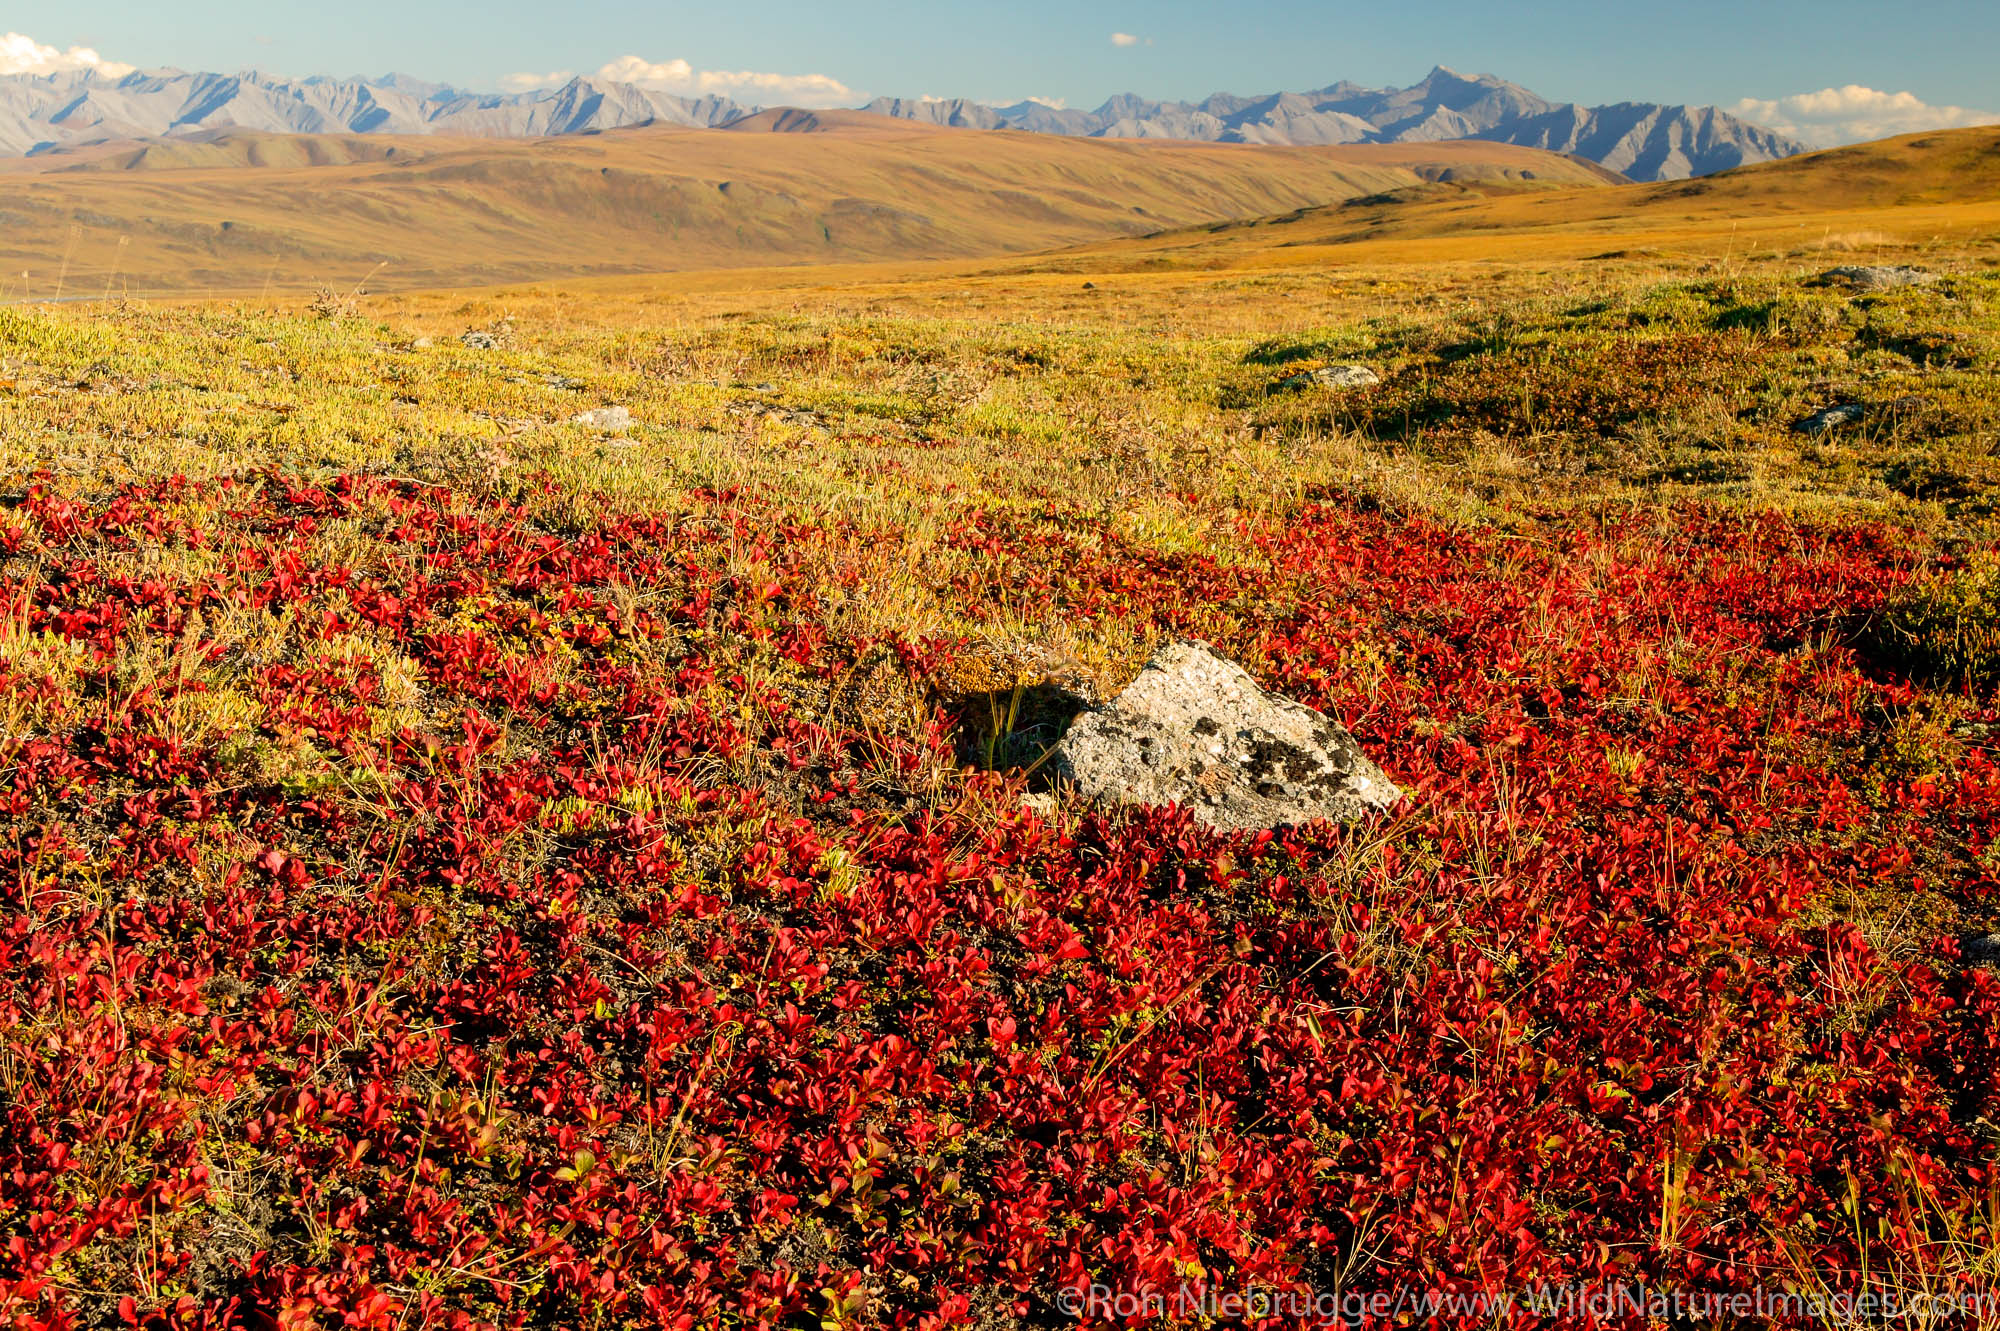 The Arctic National Wildlife Refuge and the Philip Smith Mountains of the Brooks Range, Alaska.